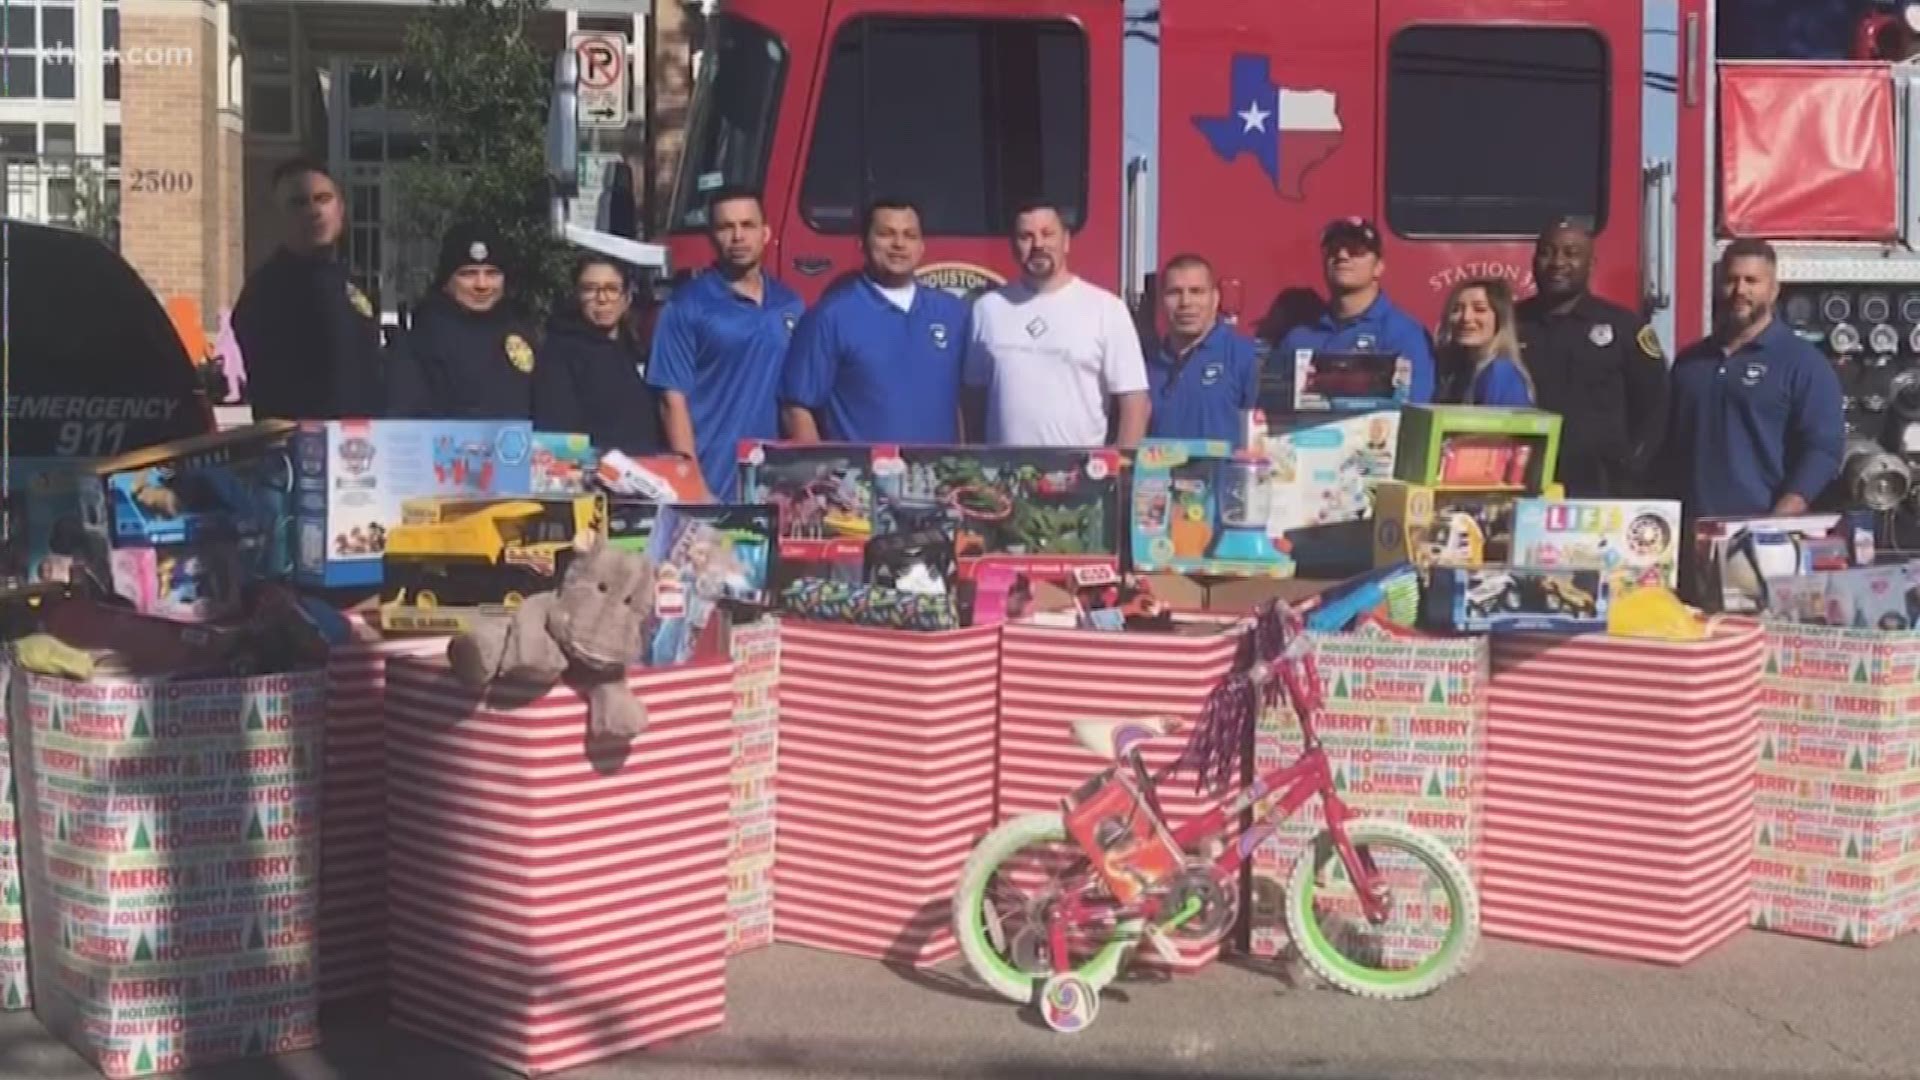 Houston Police are standing for Houston by helping young victims of crime this holiday season.